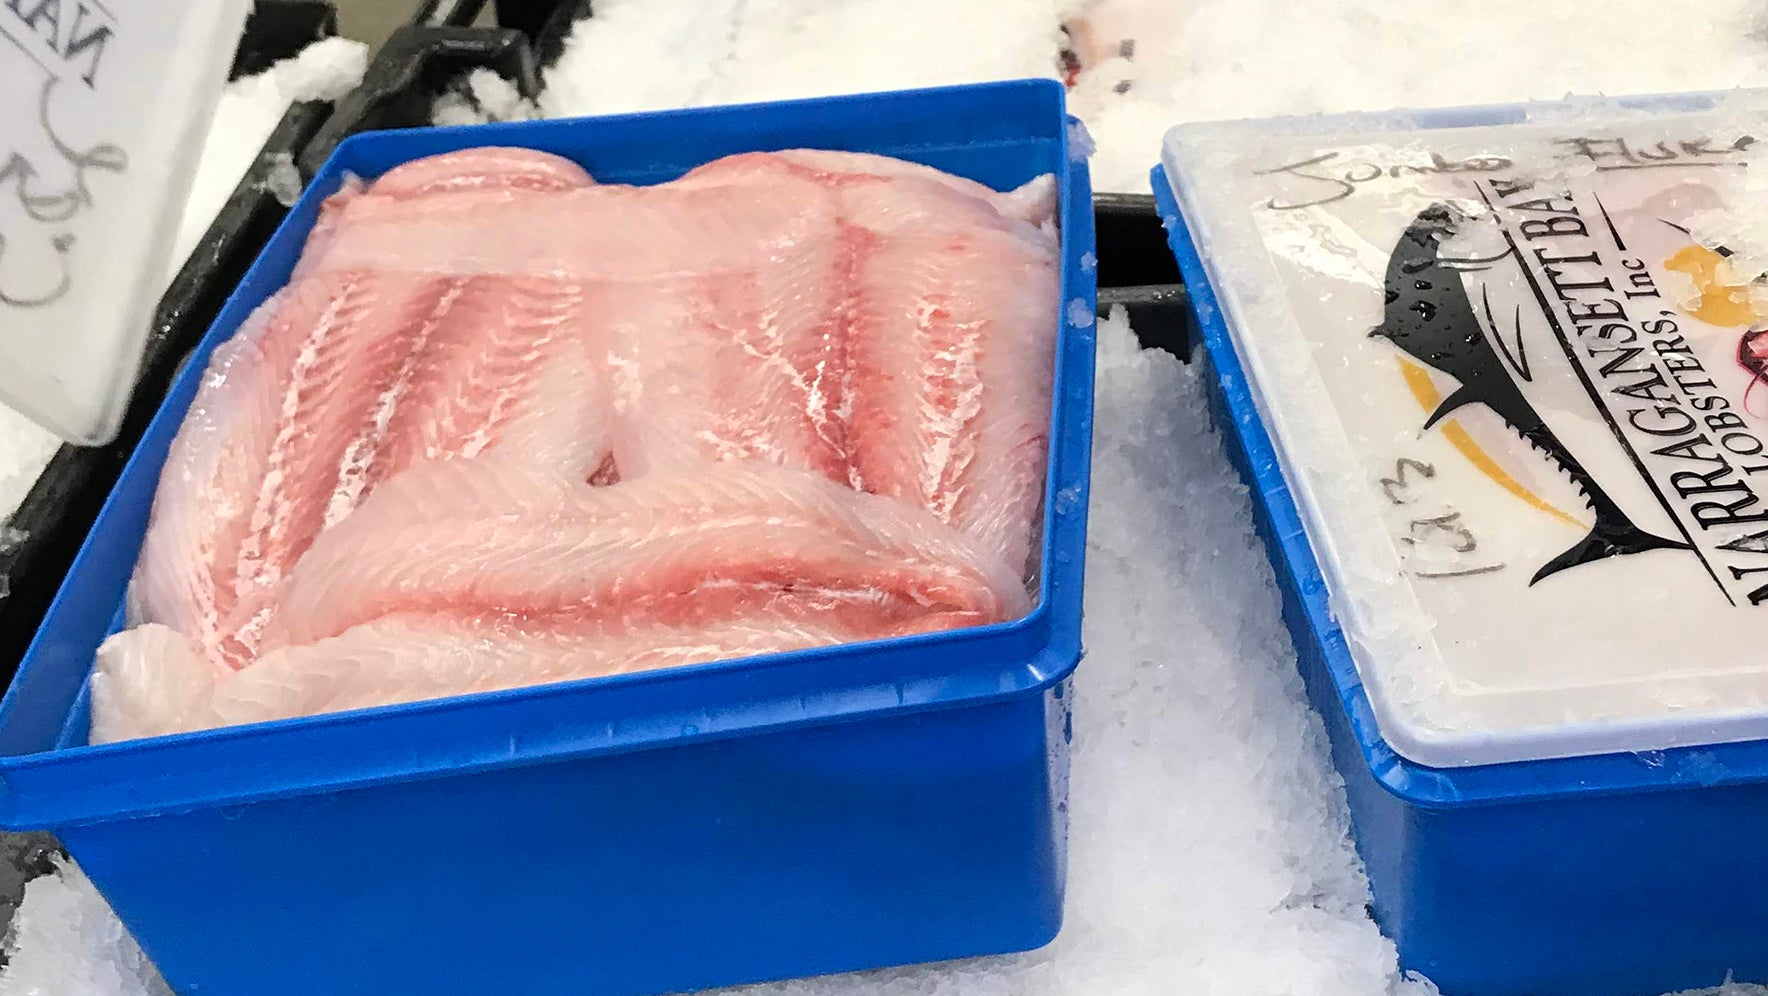 blue shipping case filled with fish filets on ice